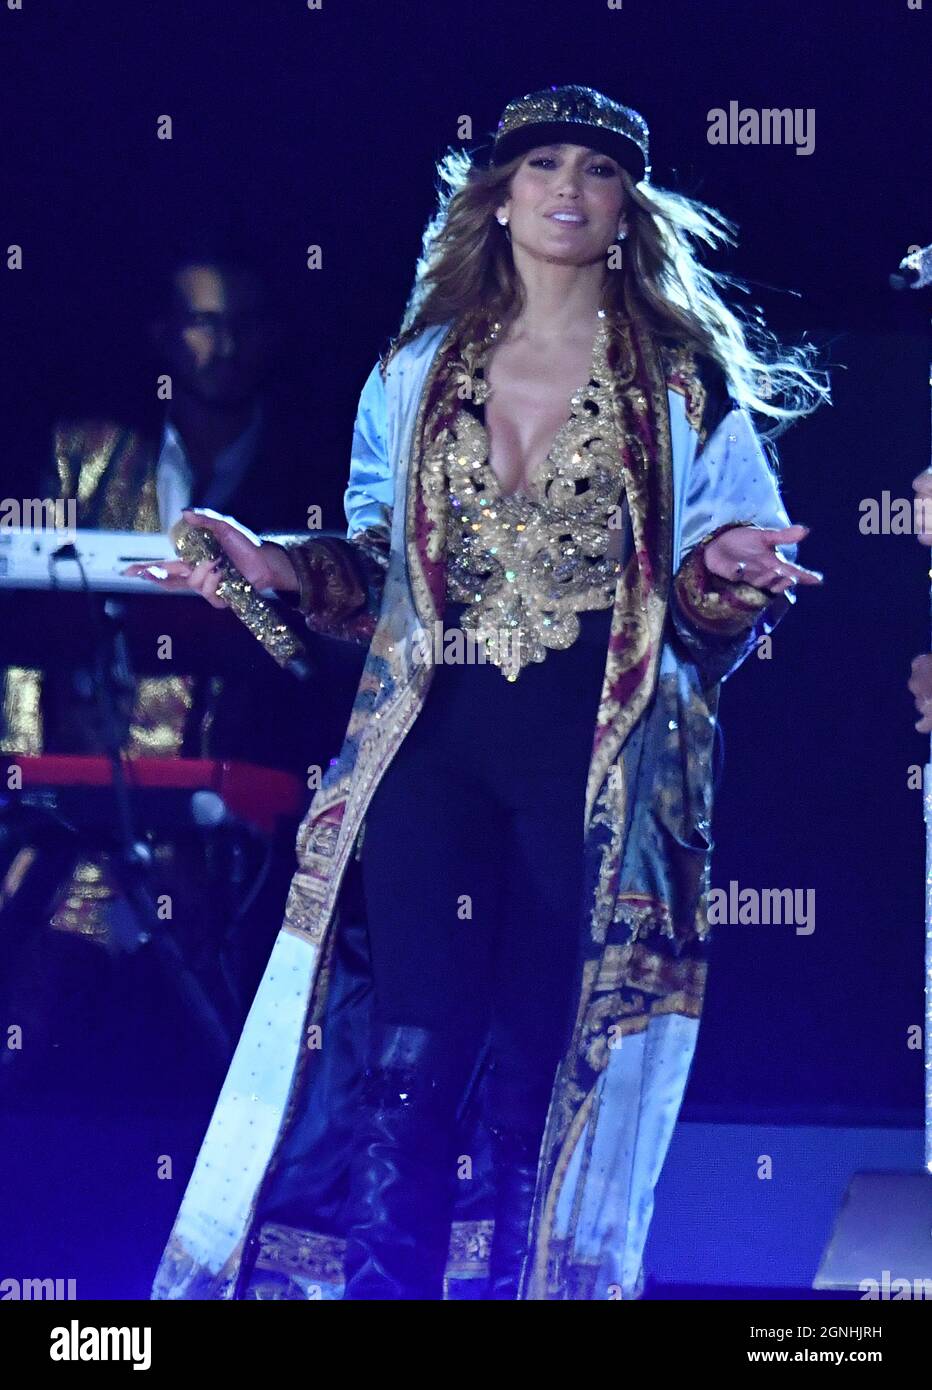 New York, NY, USA. 25th Sep, 2021. Jennifer Lopez at the 2021 Global Citizen Live Festival at the Great Lawn in Central Park, New York City on September 25, 2021. Credit: John Palmer/Media Punch/Alamy Live News Stock Photo